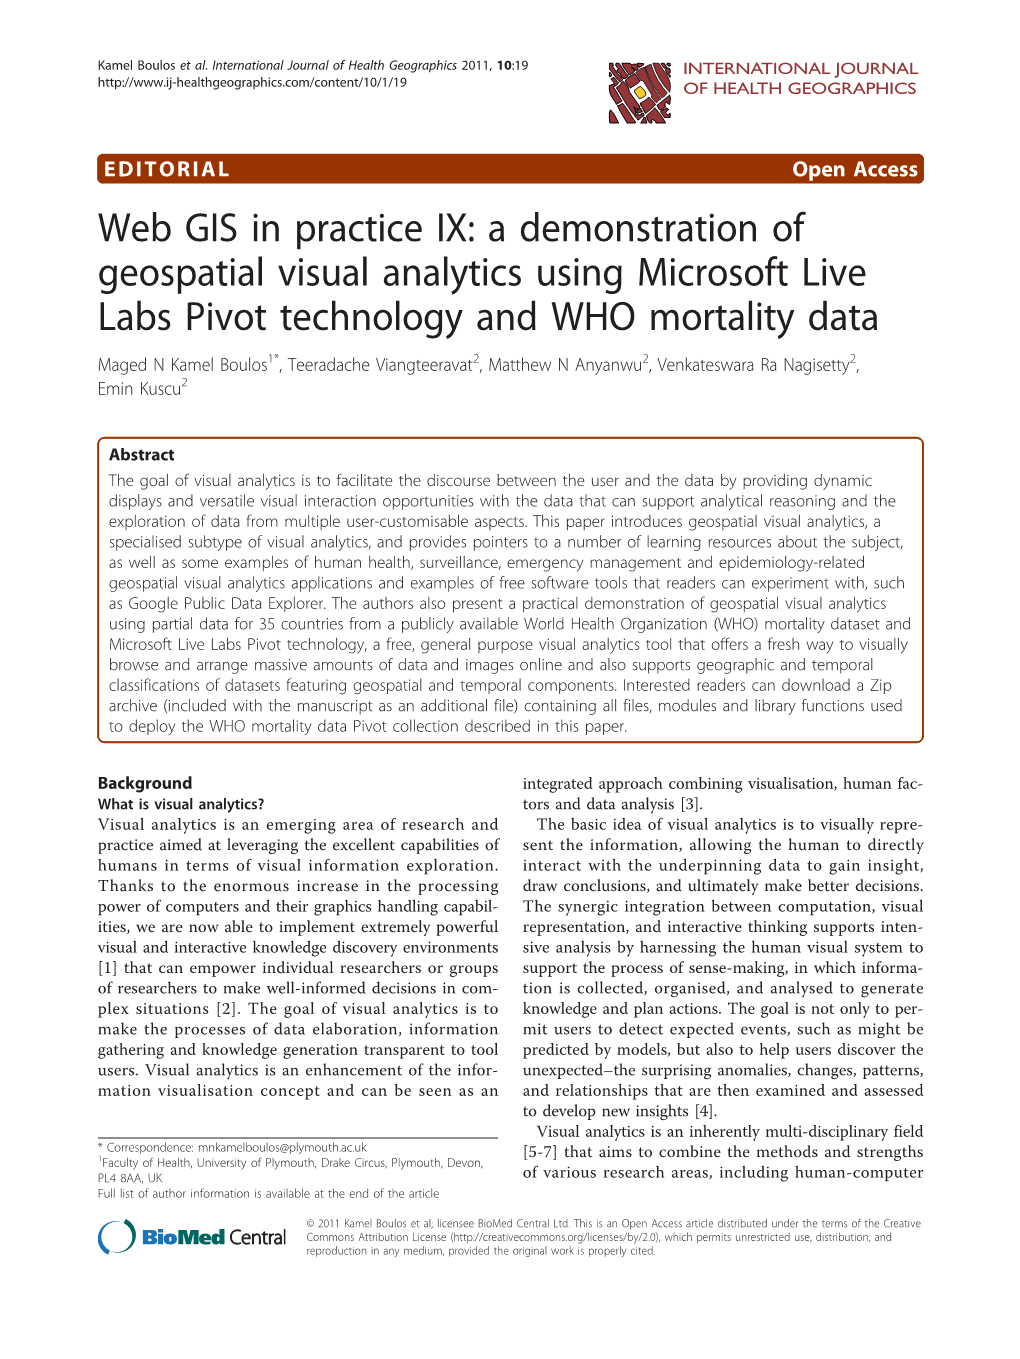 Web GIS in Practice IX: a Demonstration of Geospatial Visual